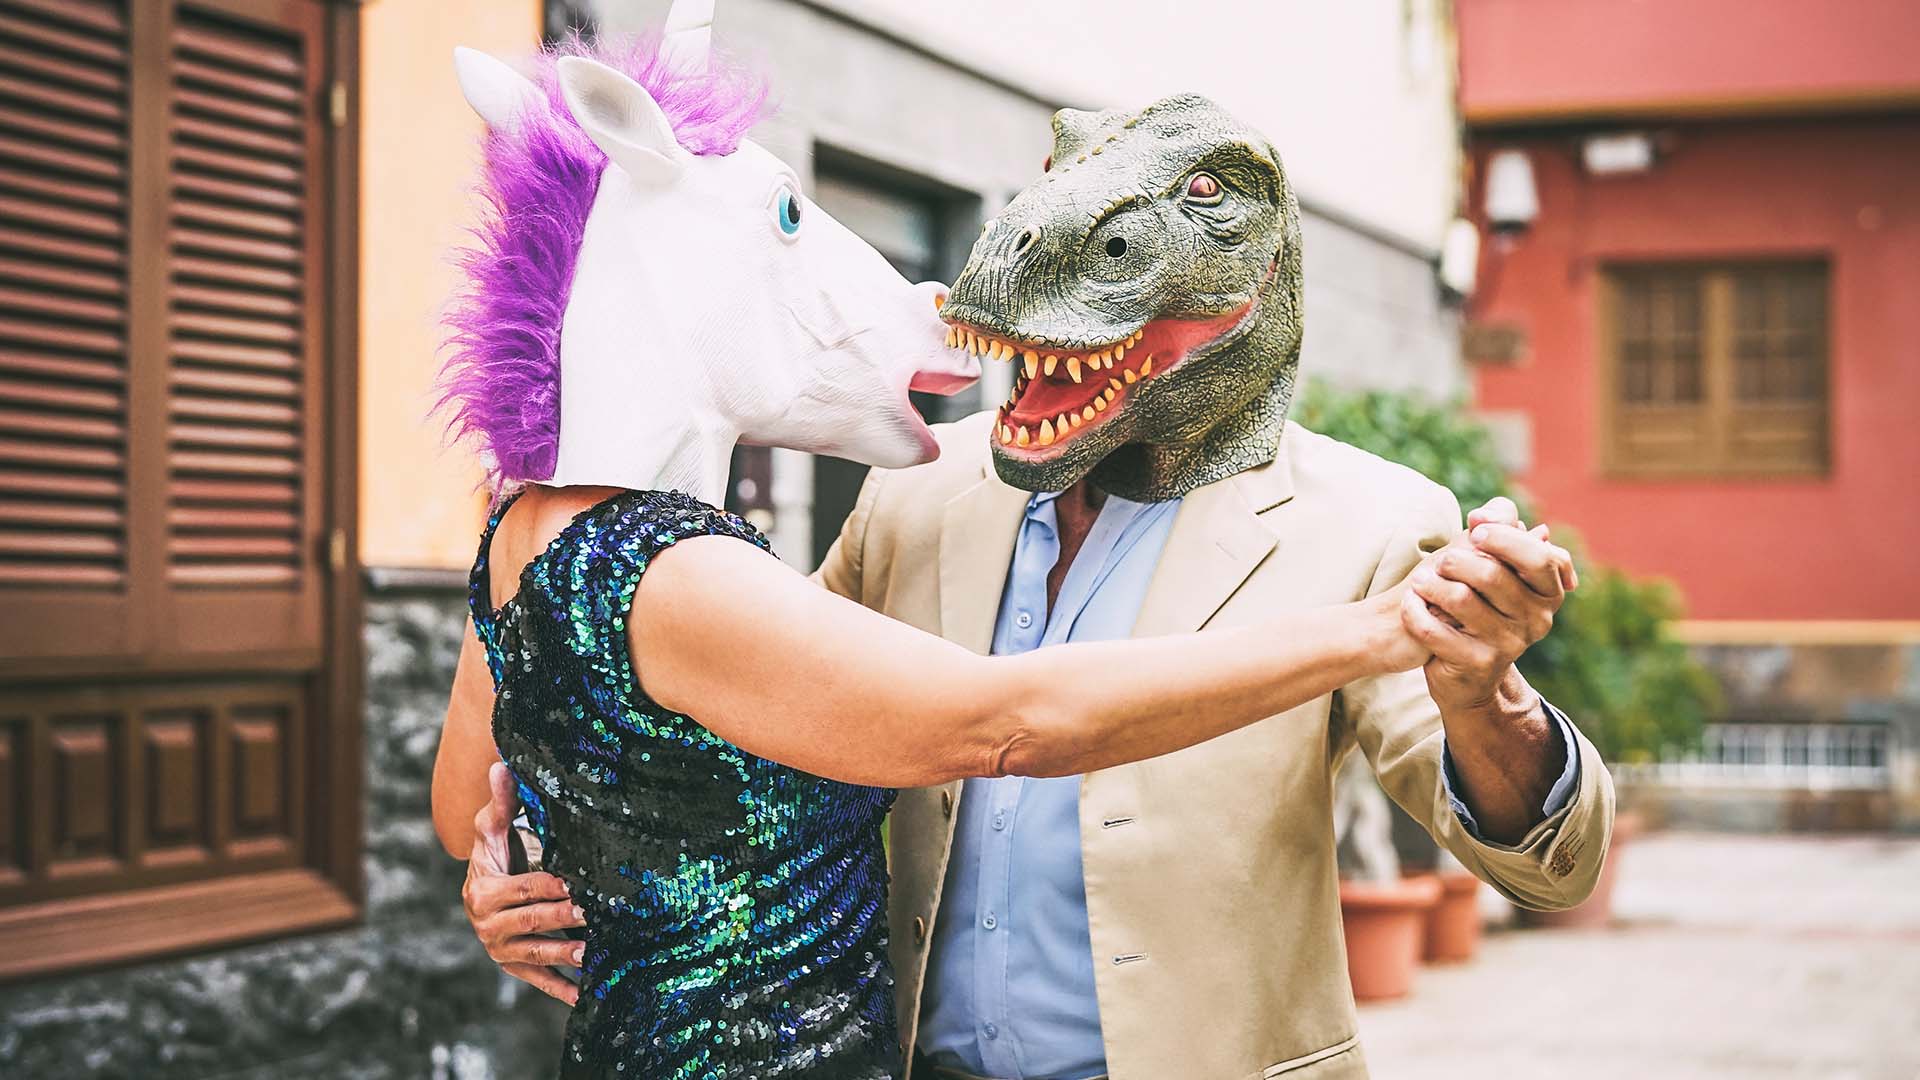 Woman in unicorn mask and man in crocodile mask slow dancing outside of a red house's porch. There are plant pots behind them